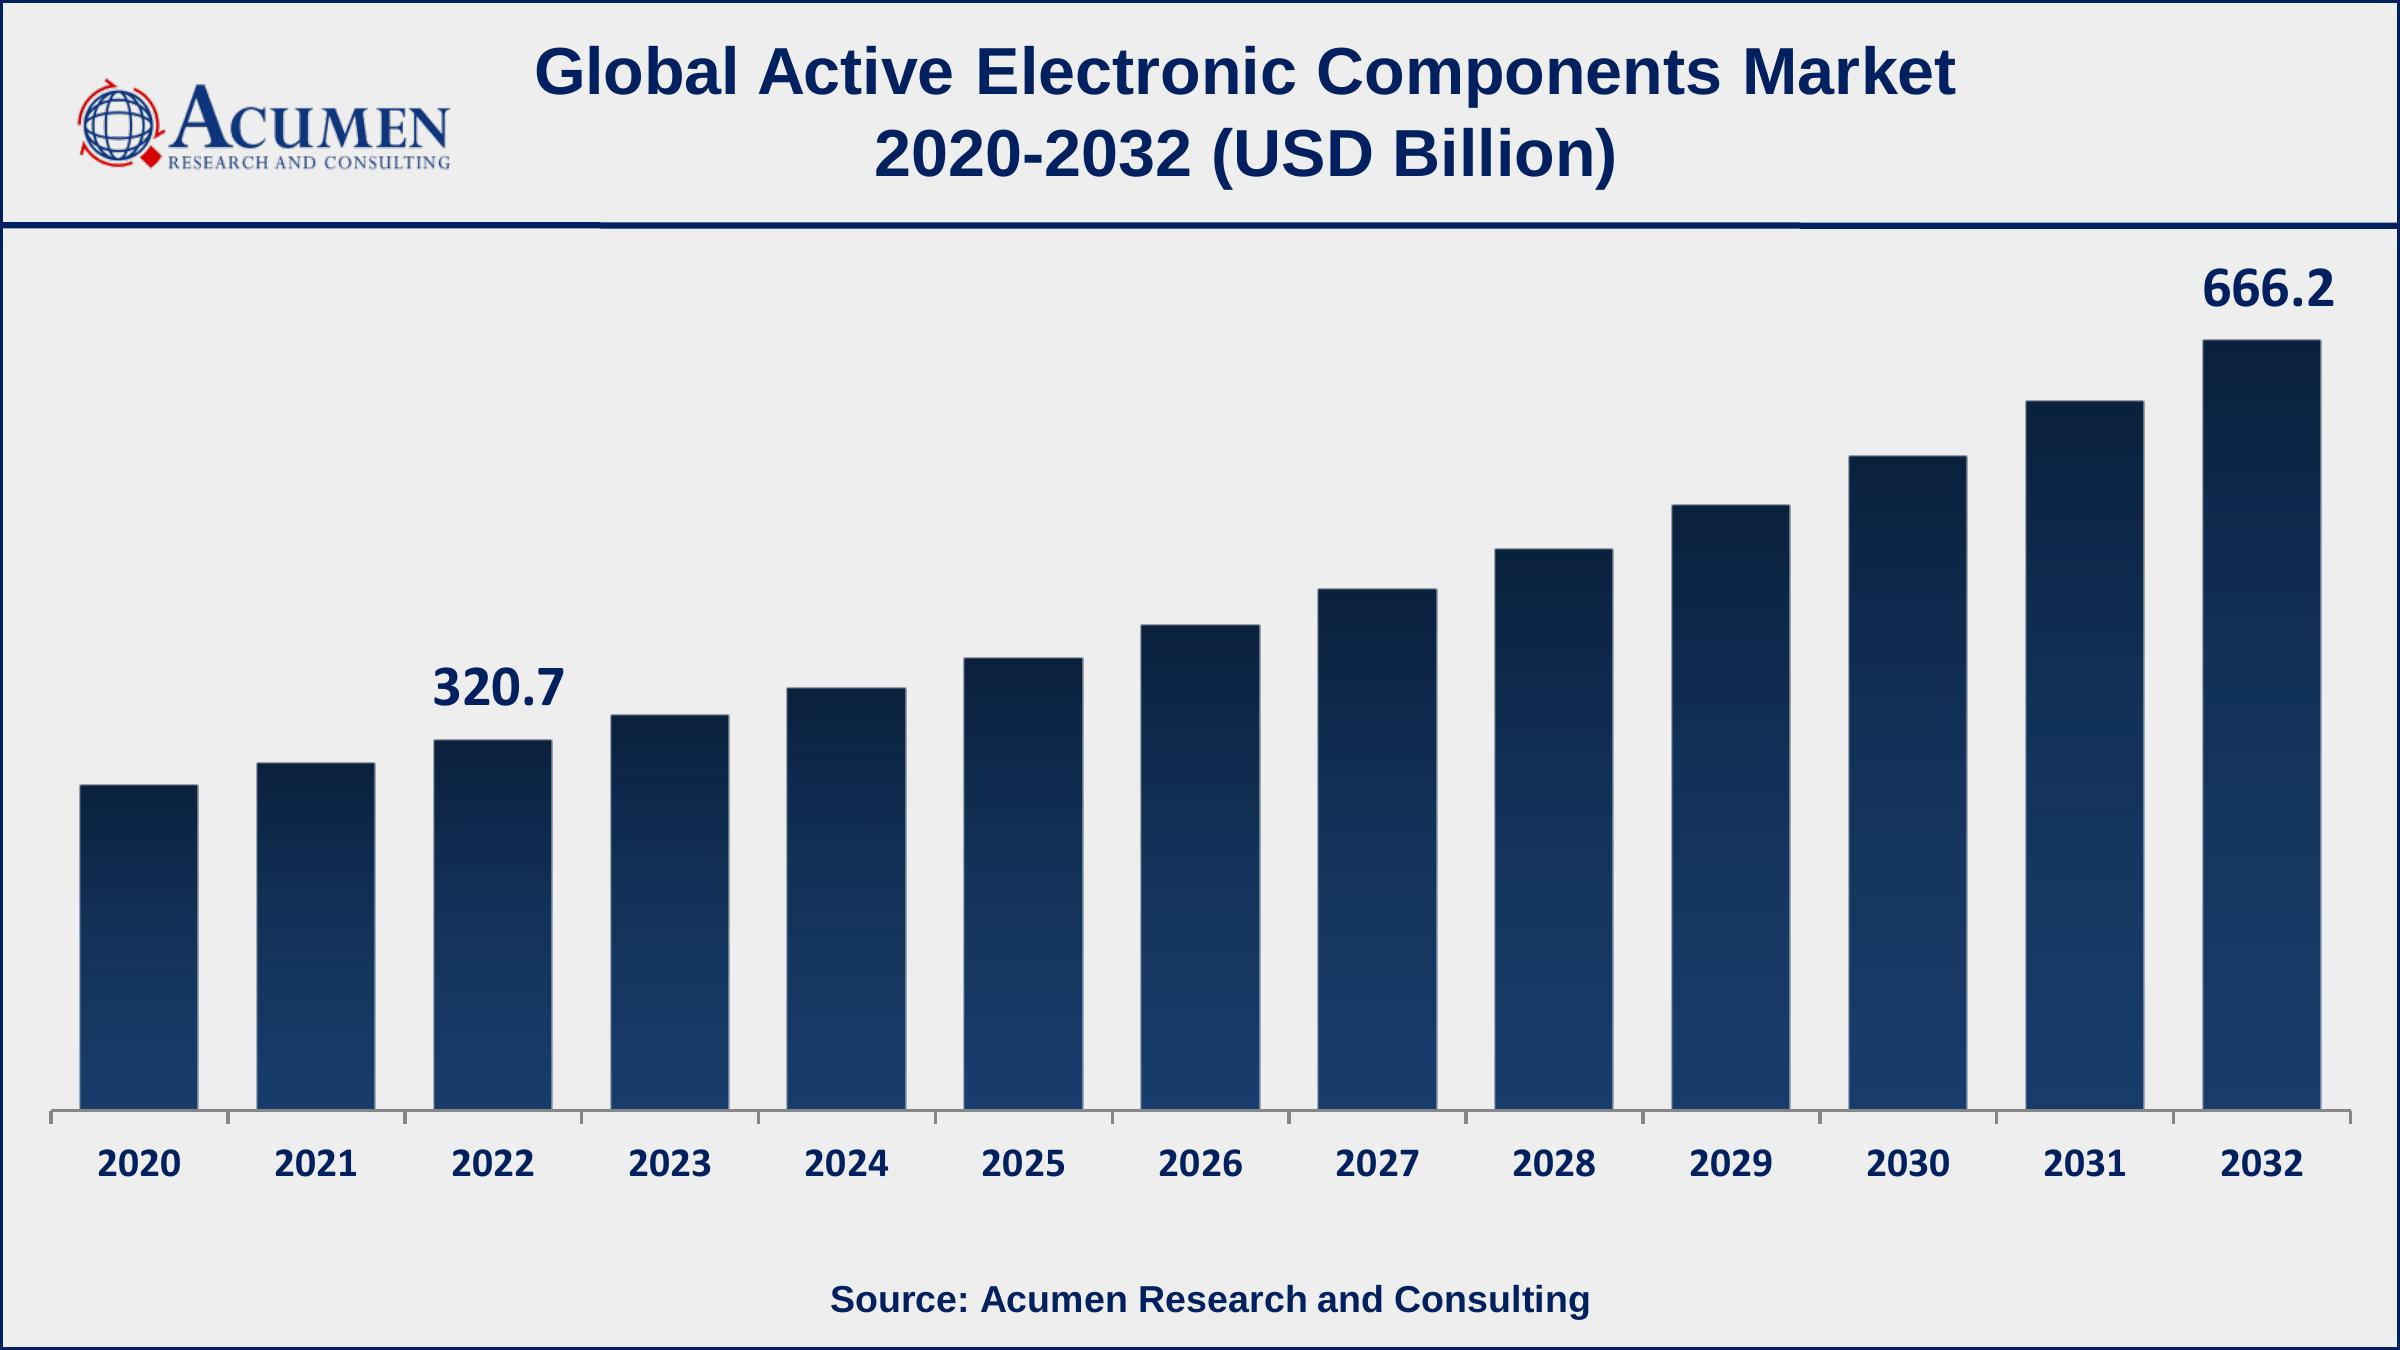 Active Electronic Components Market Drivers